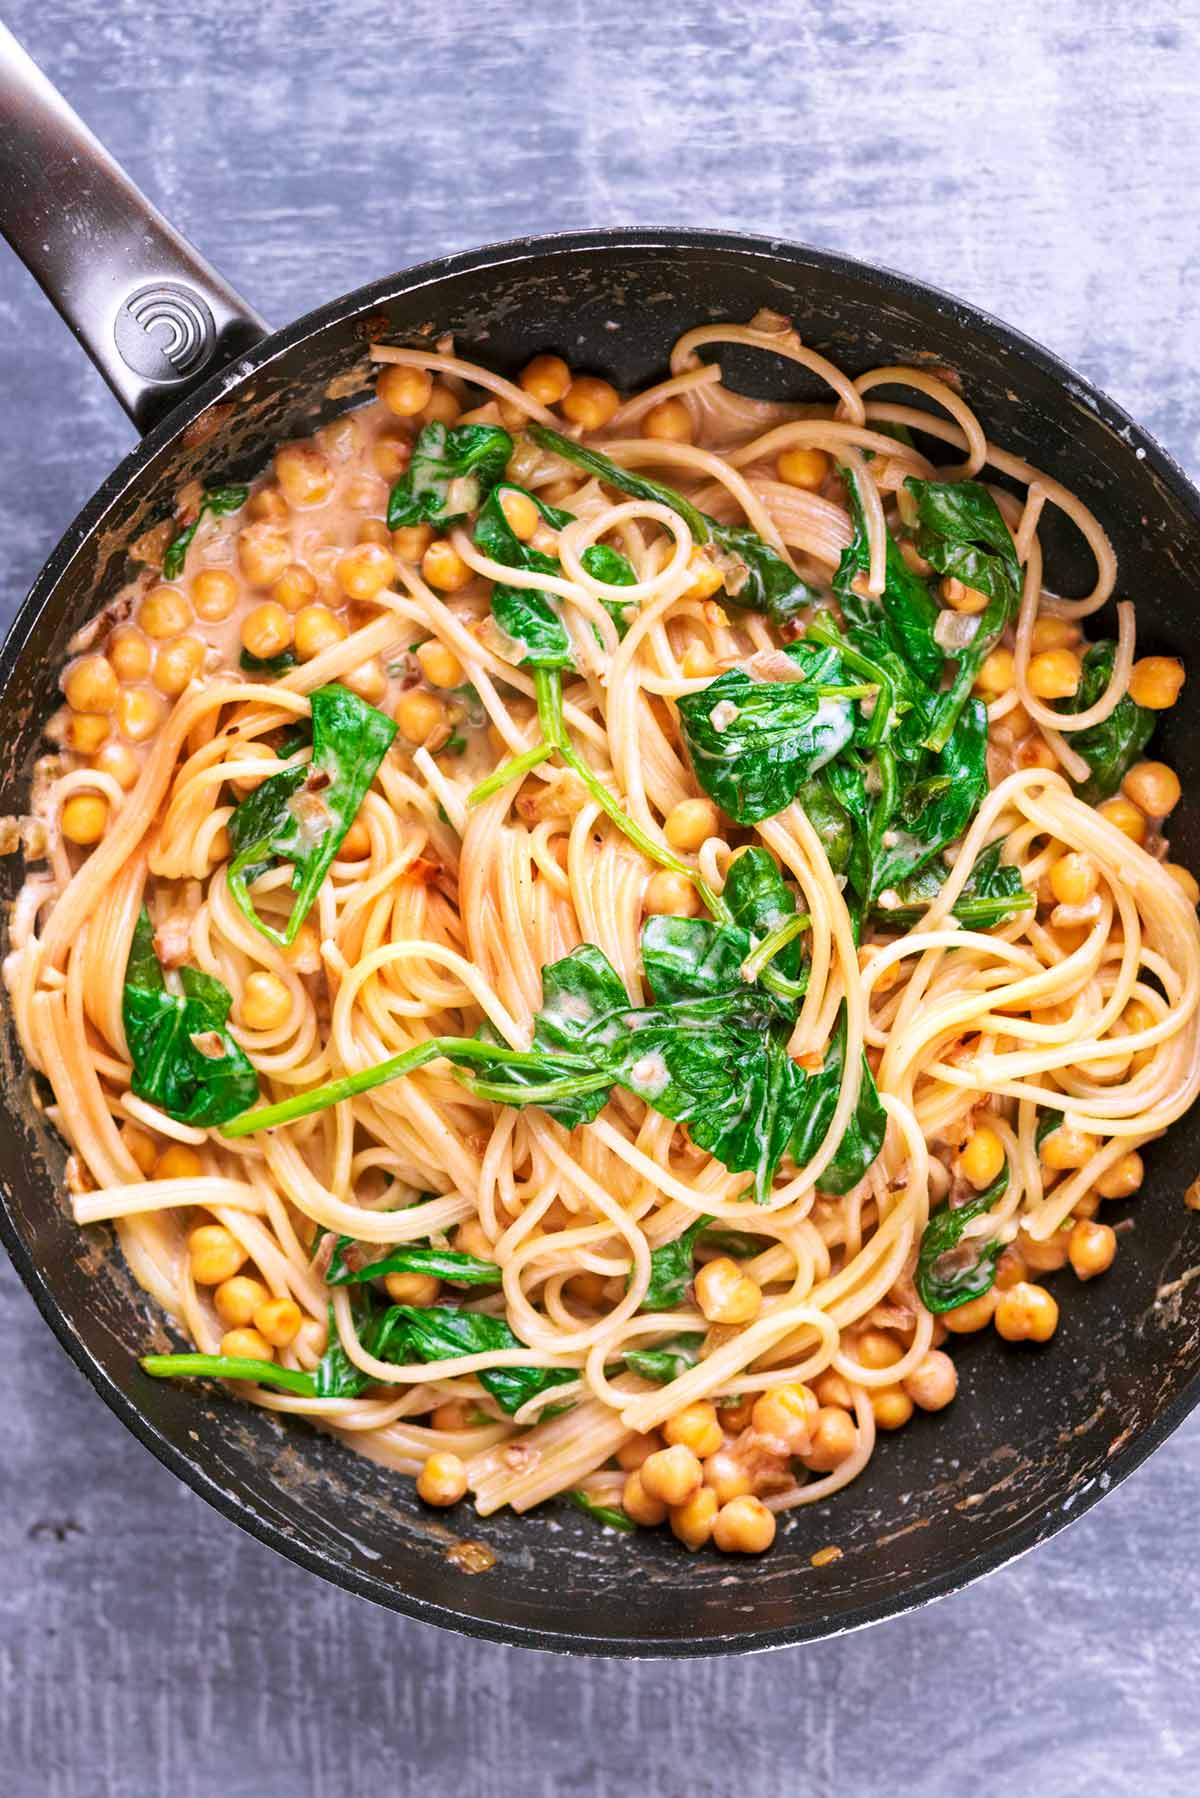 Cooked spaghetti, spinach and chickpeas cooking in a frying pan,